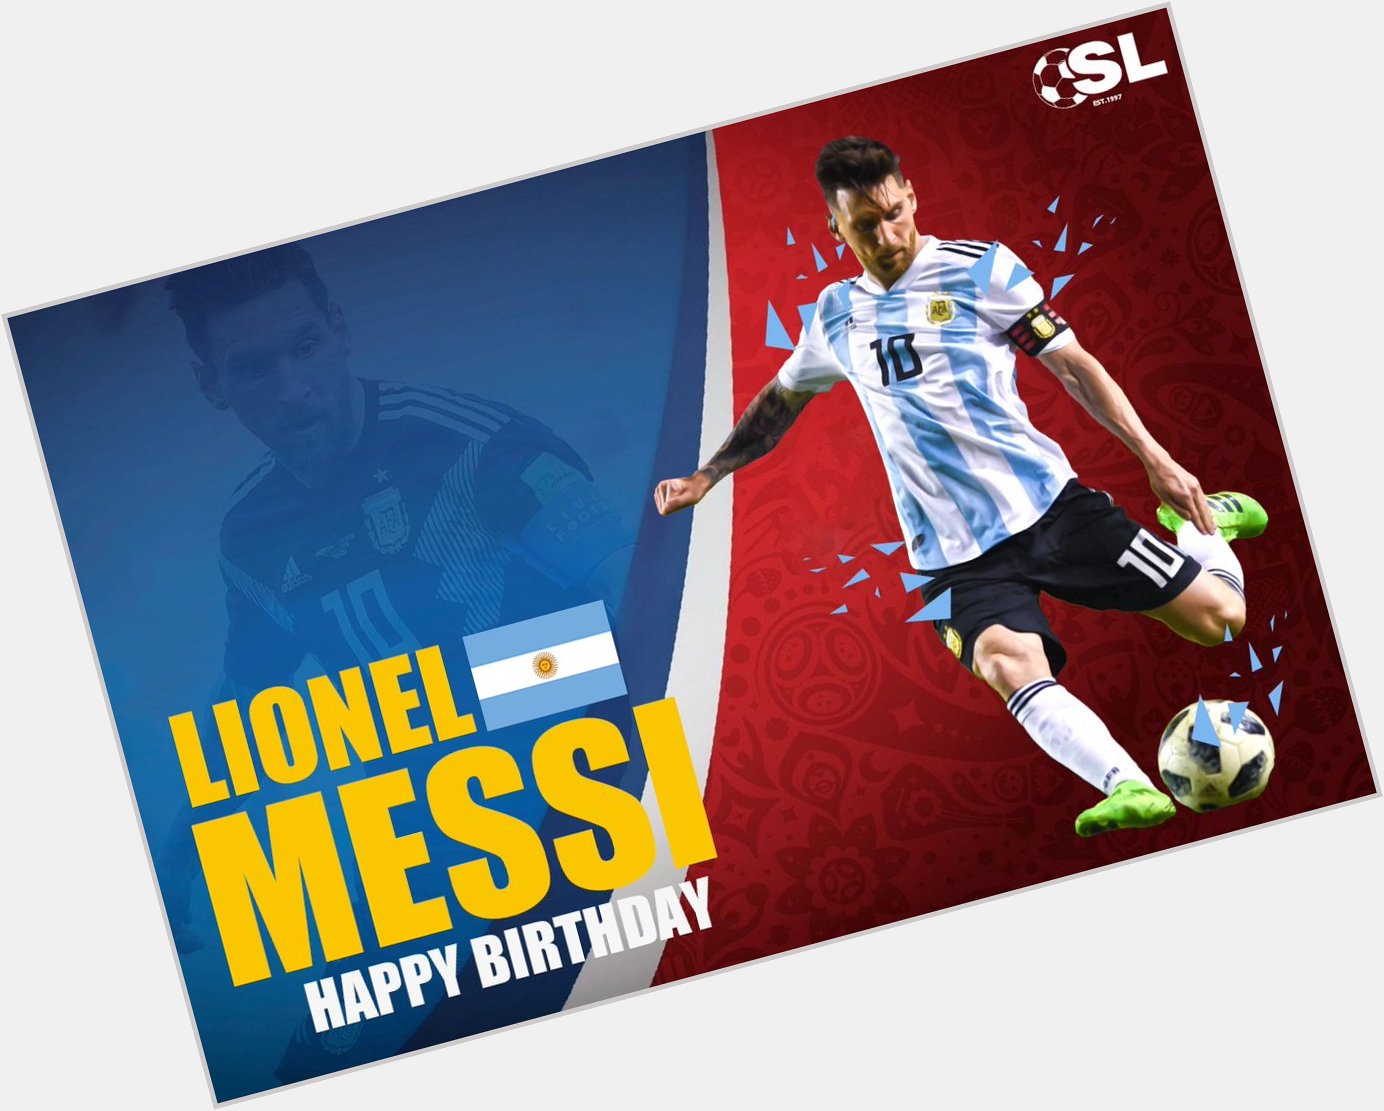 On this day, 31 years ago, a little magician was born! Join us in wishing Lionel Messi a Happy Birthday! 